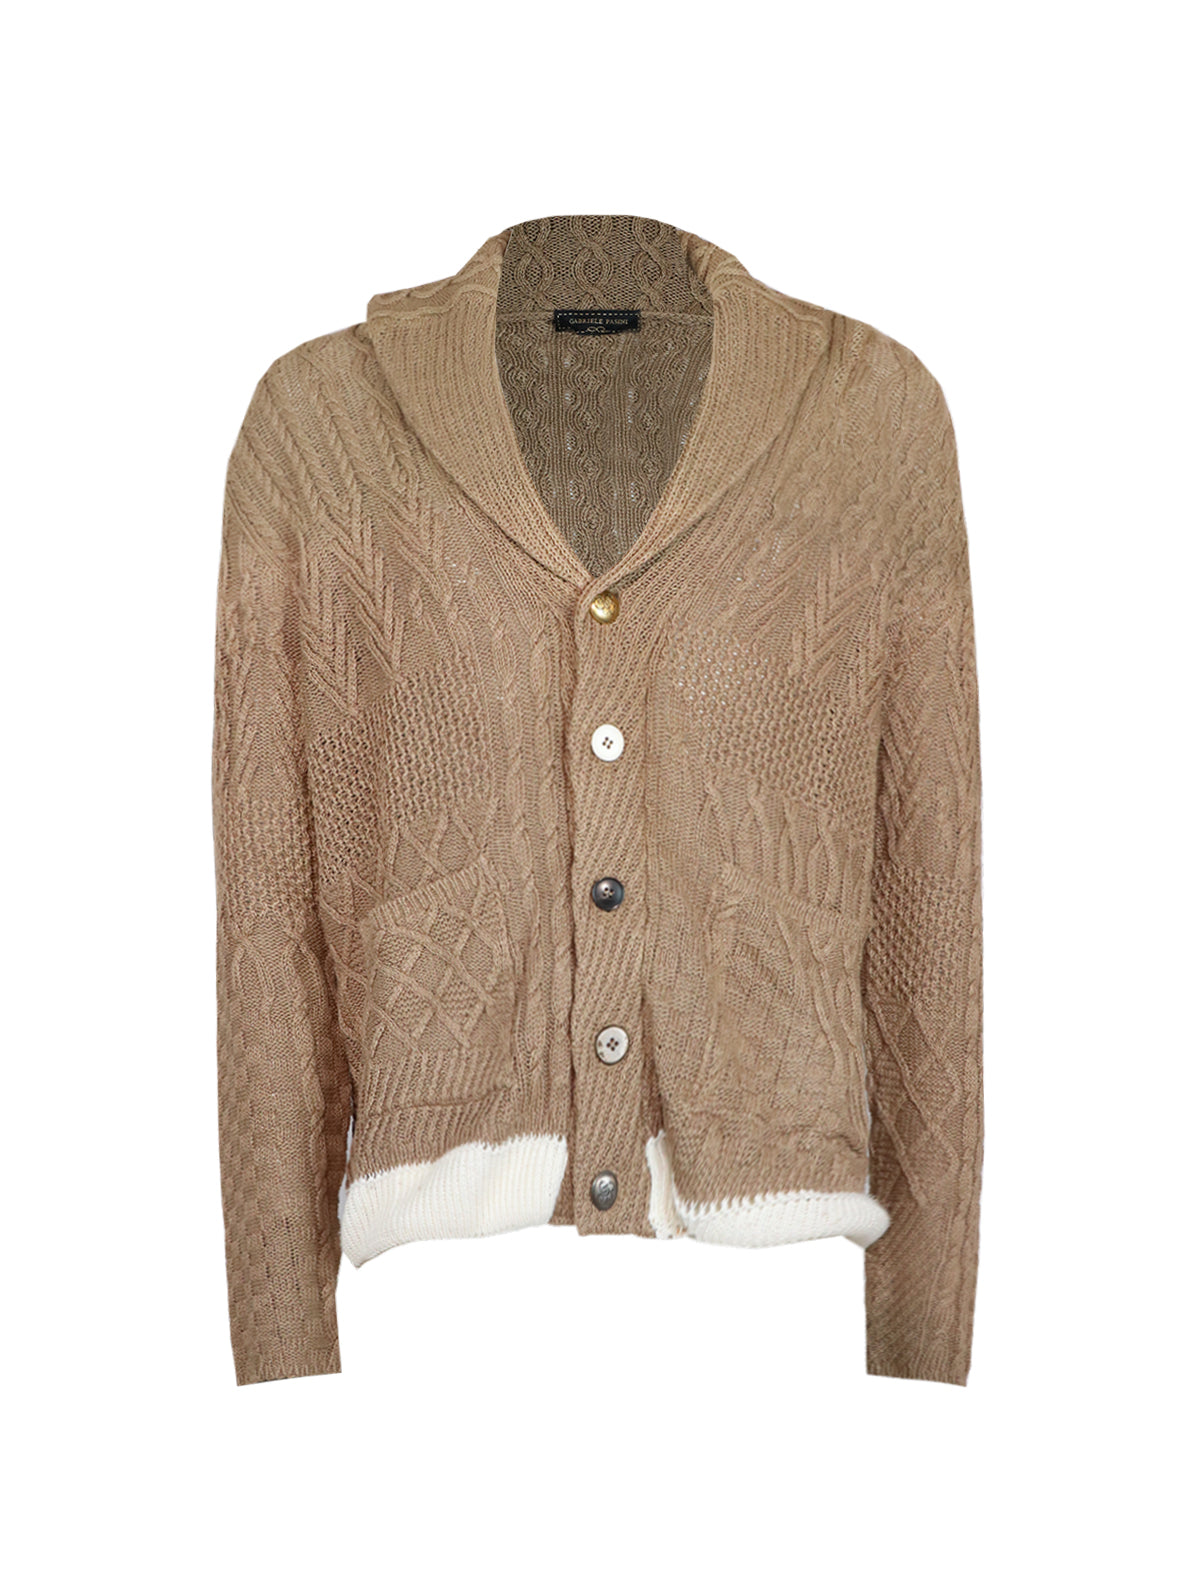 Gabriele Pasini Flax Cable Knit Cardigan in Brown/White